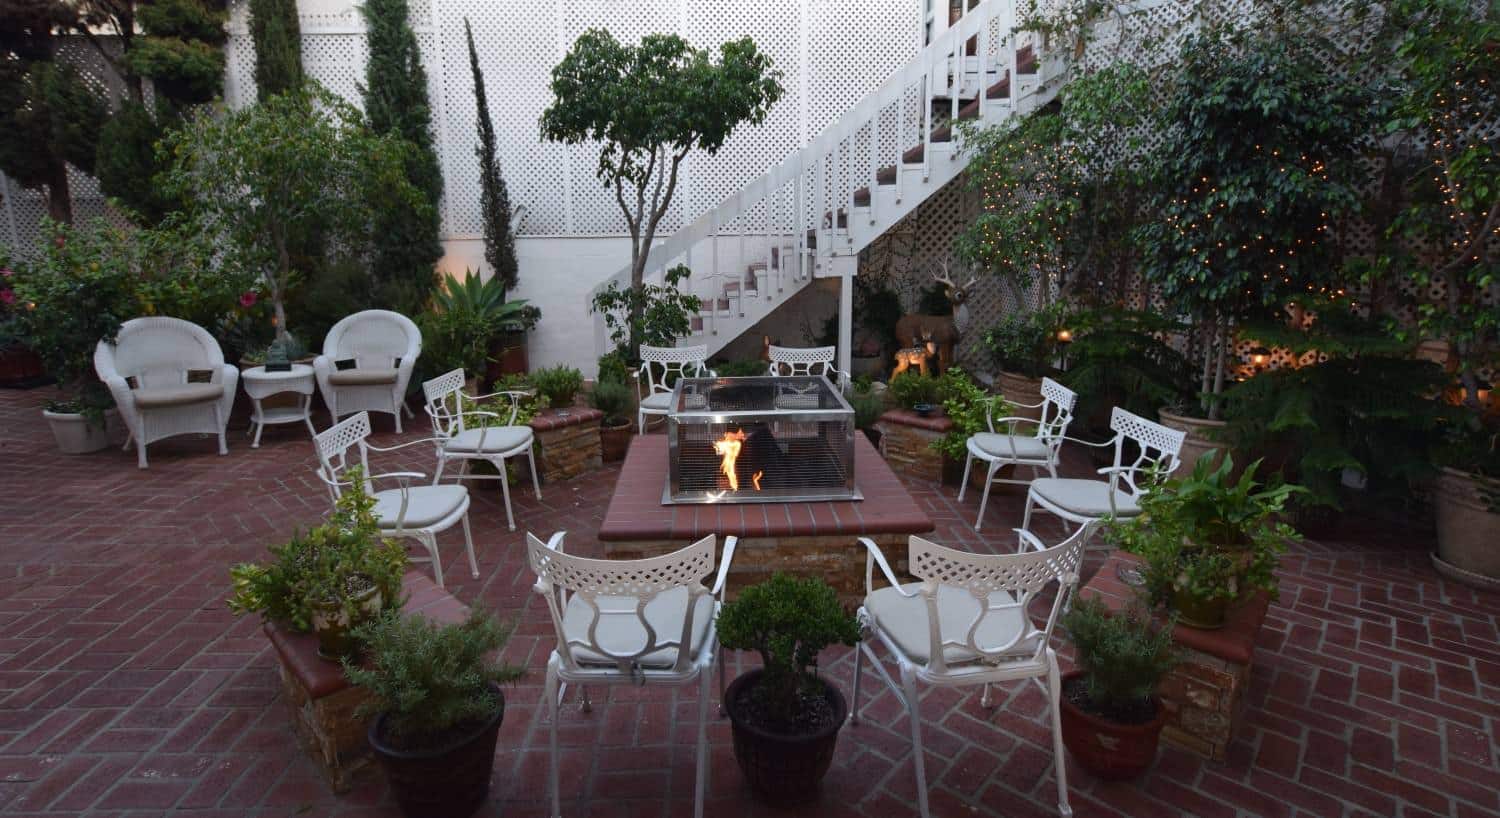 Courtyard patio with red brick, white chairs around a stone fire pit with greenery and sparkling lights around